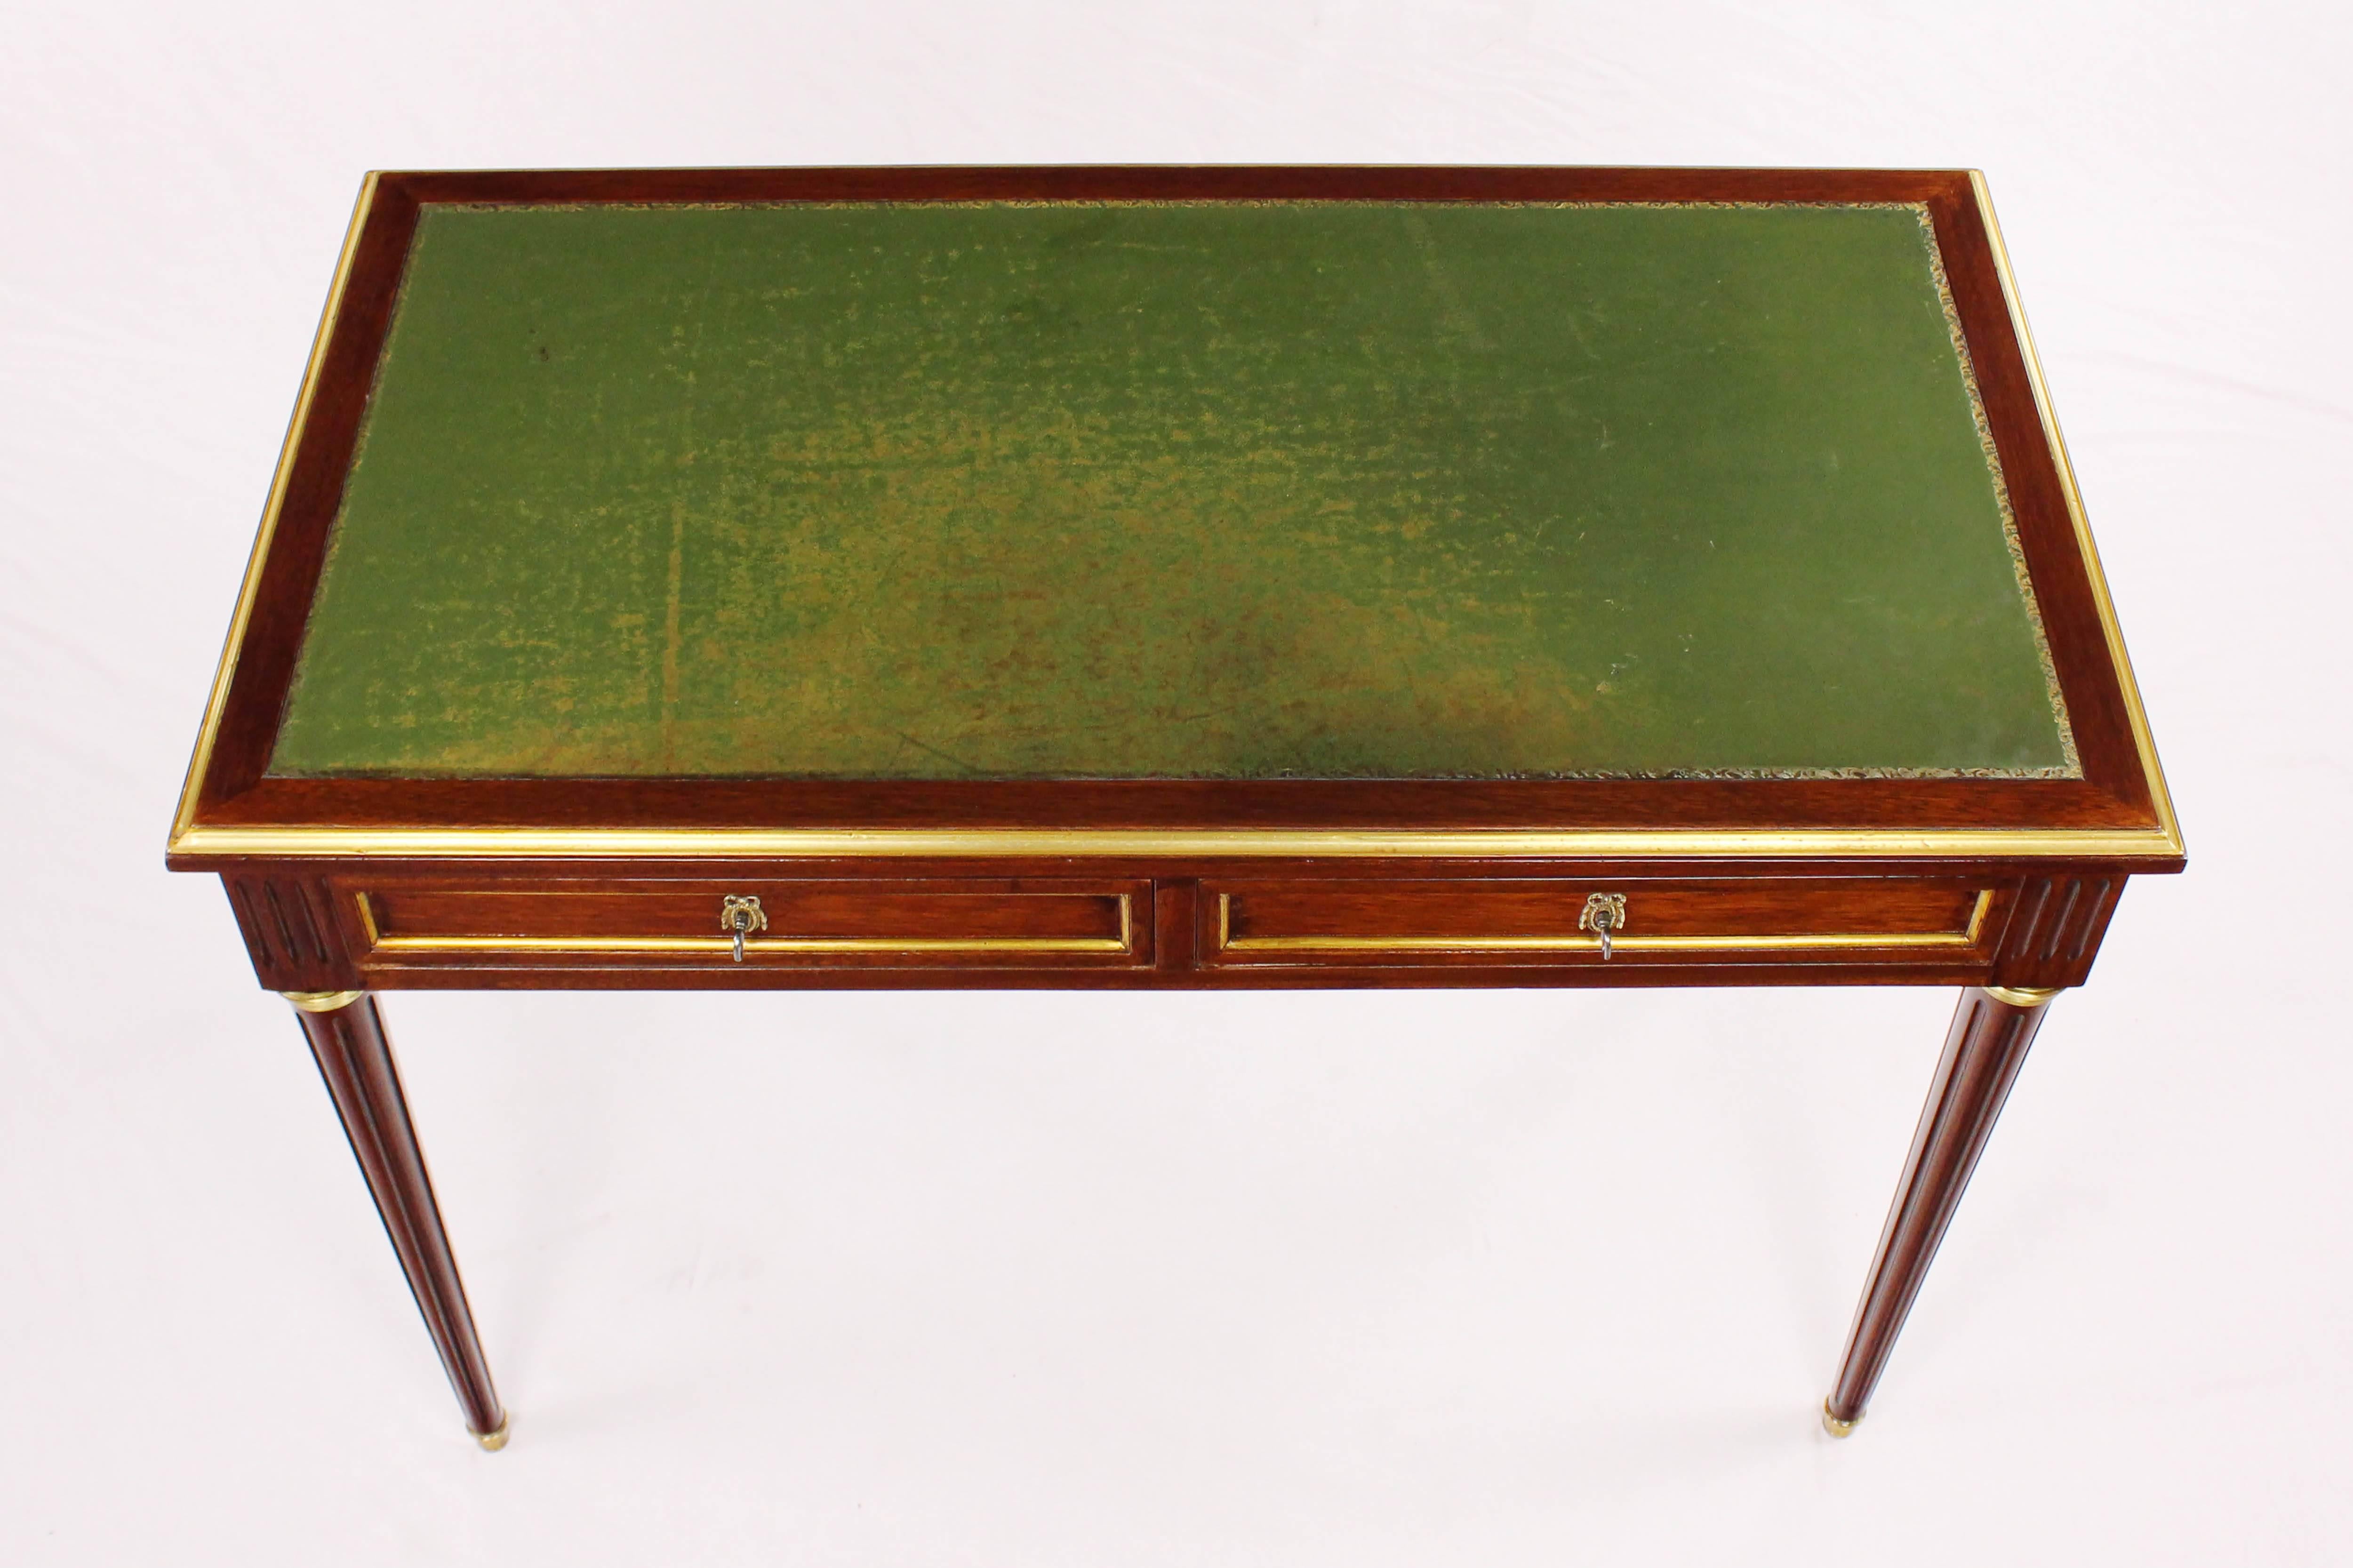 • French 19th century desk, circa 1850-1860
• Mahogany veneer
• Writing surface with leather
• Extendable sides
• Two lockable pushes
• Conical running up legs
• Restored residential-ready state
• French shellac hand polish
• Measures: